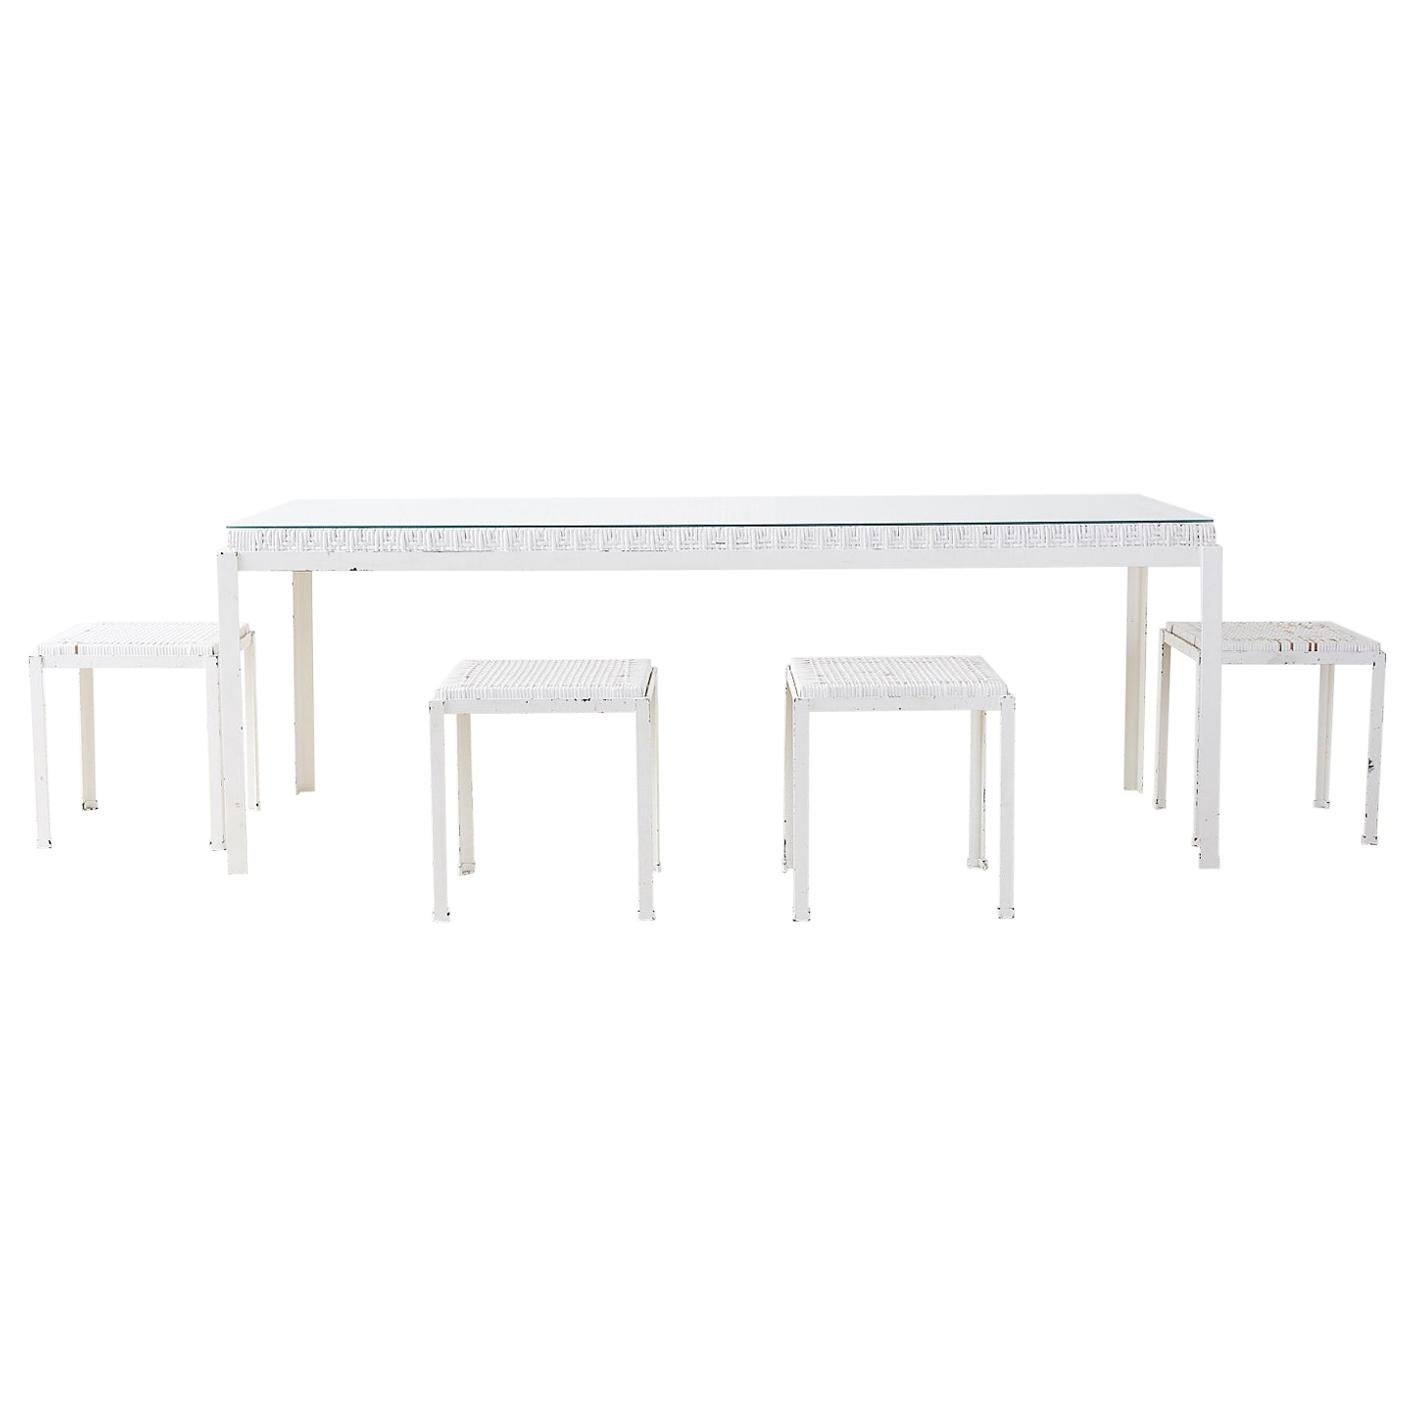 Danny Ho Fong California Modern Woven Cane Dining Table For Sale